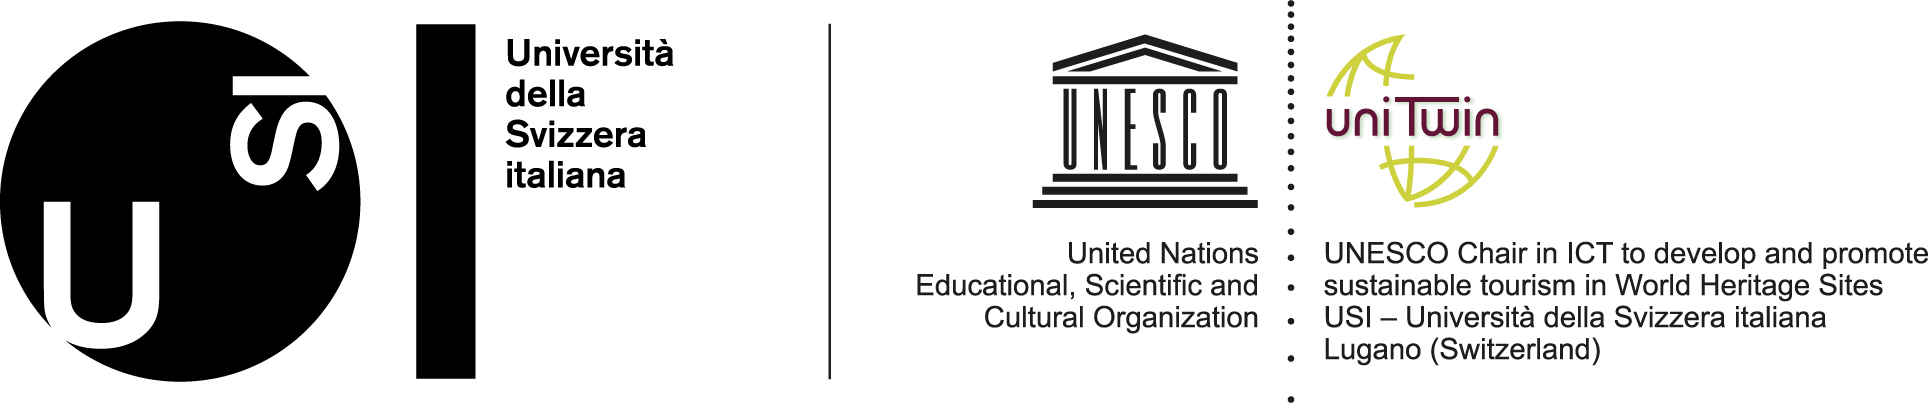 UNESCO Chair in ICT to develop and promote sustainable tourism in World Heritage Sites